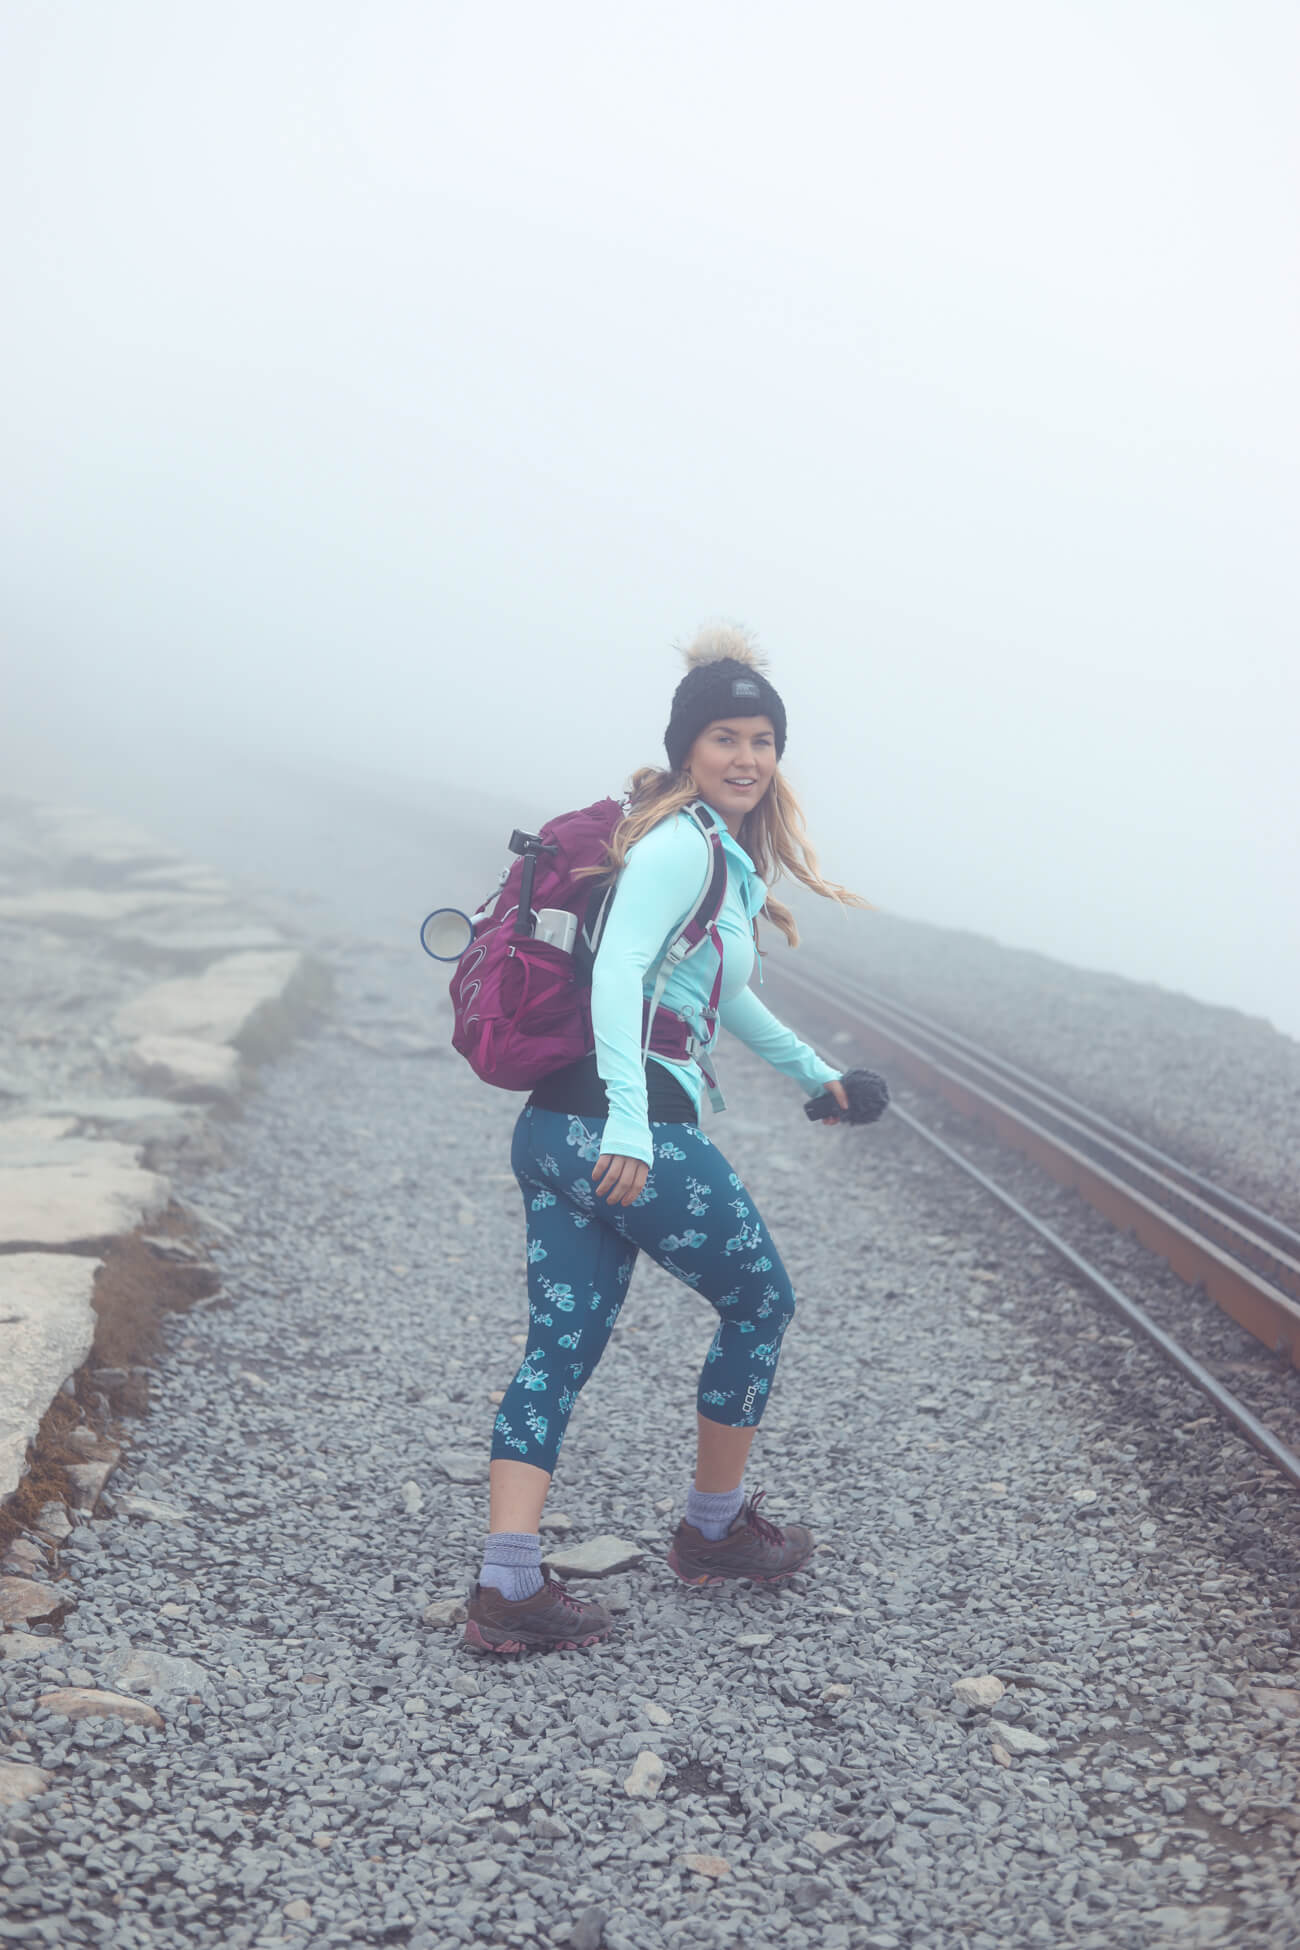 A guide to climbing to Snowdon's summit, Snowdonia Wales | Where's Mollie? A travel and adventure lifestyle blog